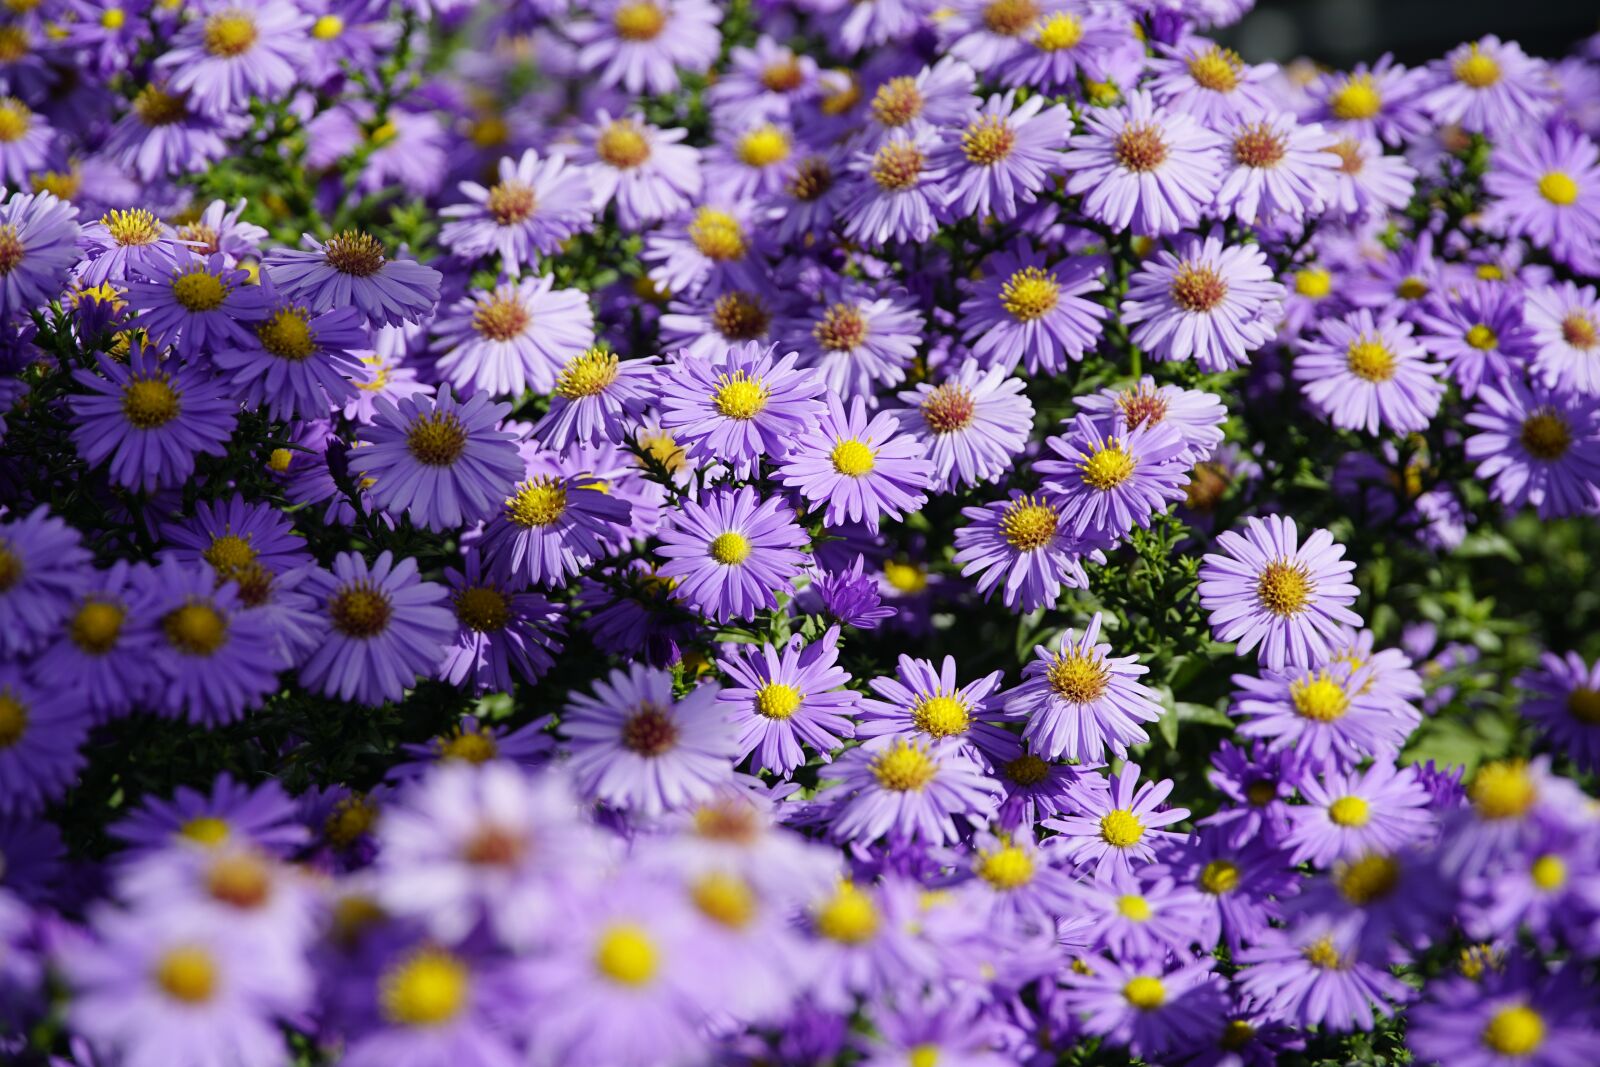 Sony a7R II sample photo. Garden, flowers, asters photography